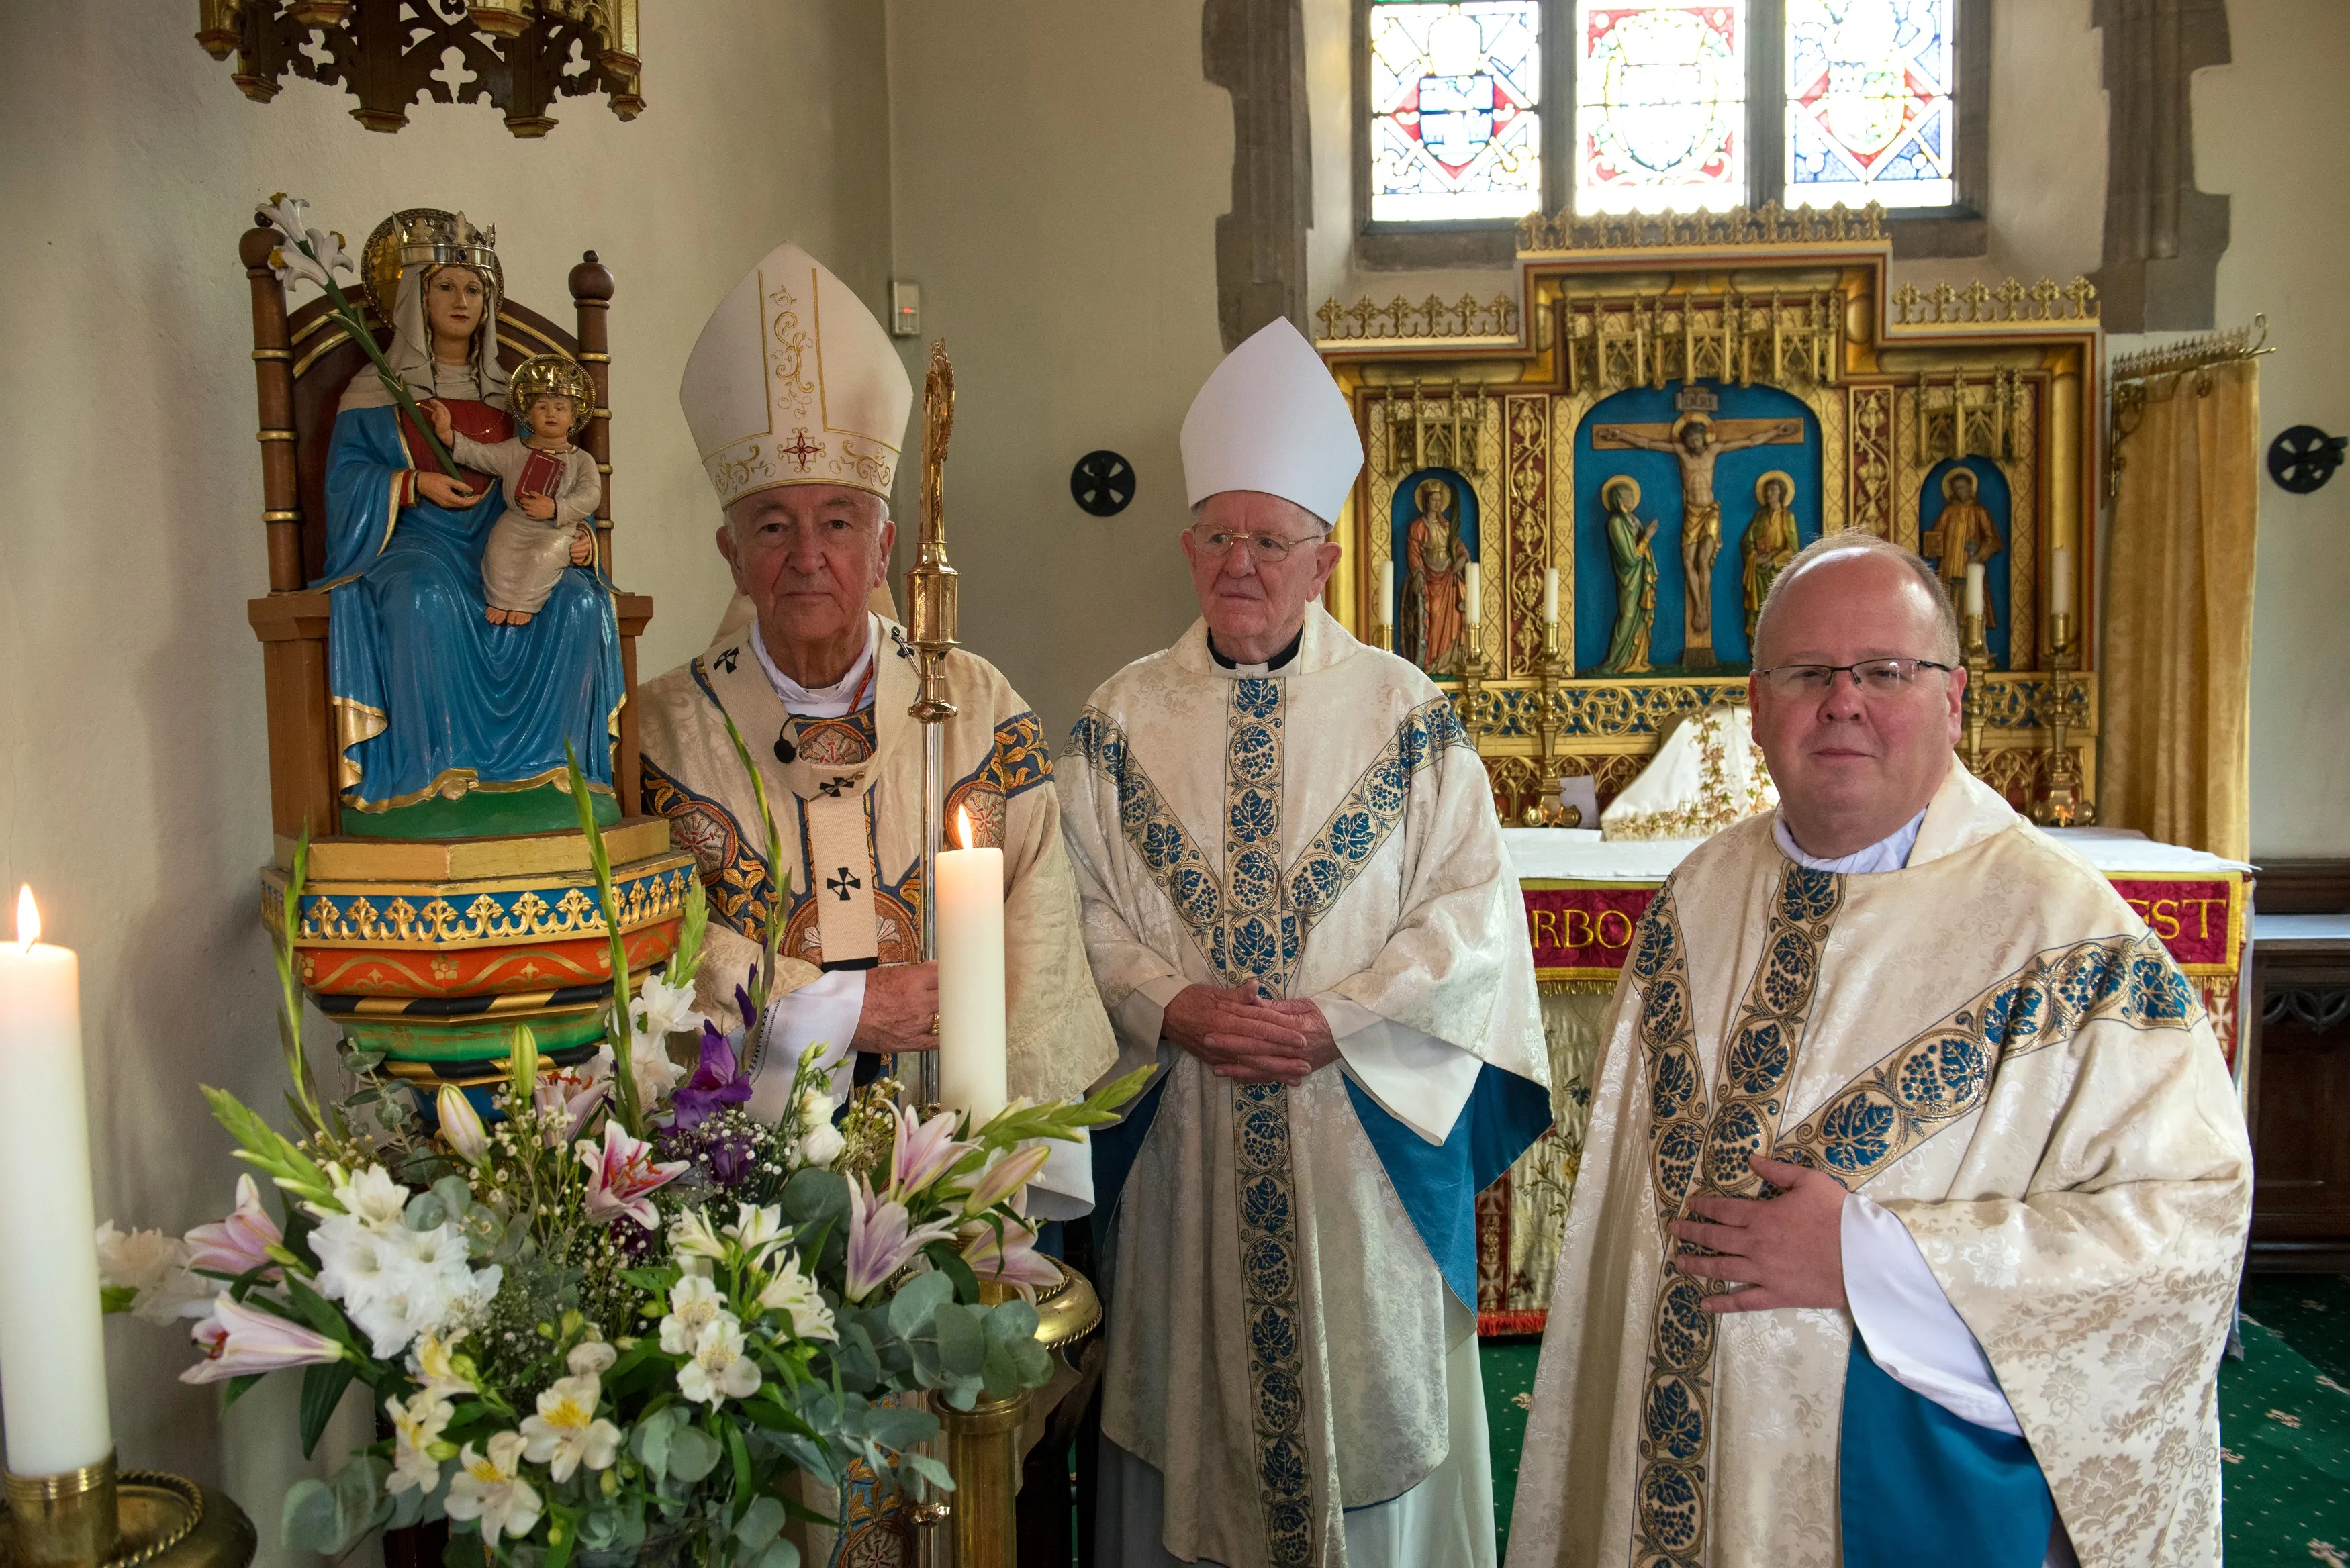 The new Rector Father Robert Billing with Cardinal Vincent Nichols (Archbishop of Westminster and the Primate of England and Wales) and Bishop Michael Campbell, OSA (Bishop Emeritus of Lancaster) in the Slipper Chapel on the occasion of Archdiocese of Westminster pilgrimage to Walsingham, the day before Father Billings' official induction as the new Rector. Sept 23, 2023. Credit: Marcin Mliczko